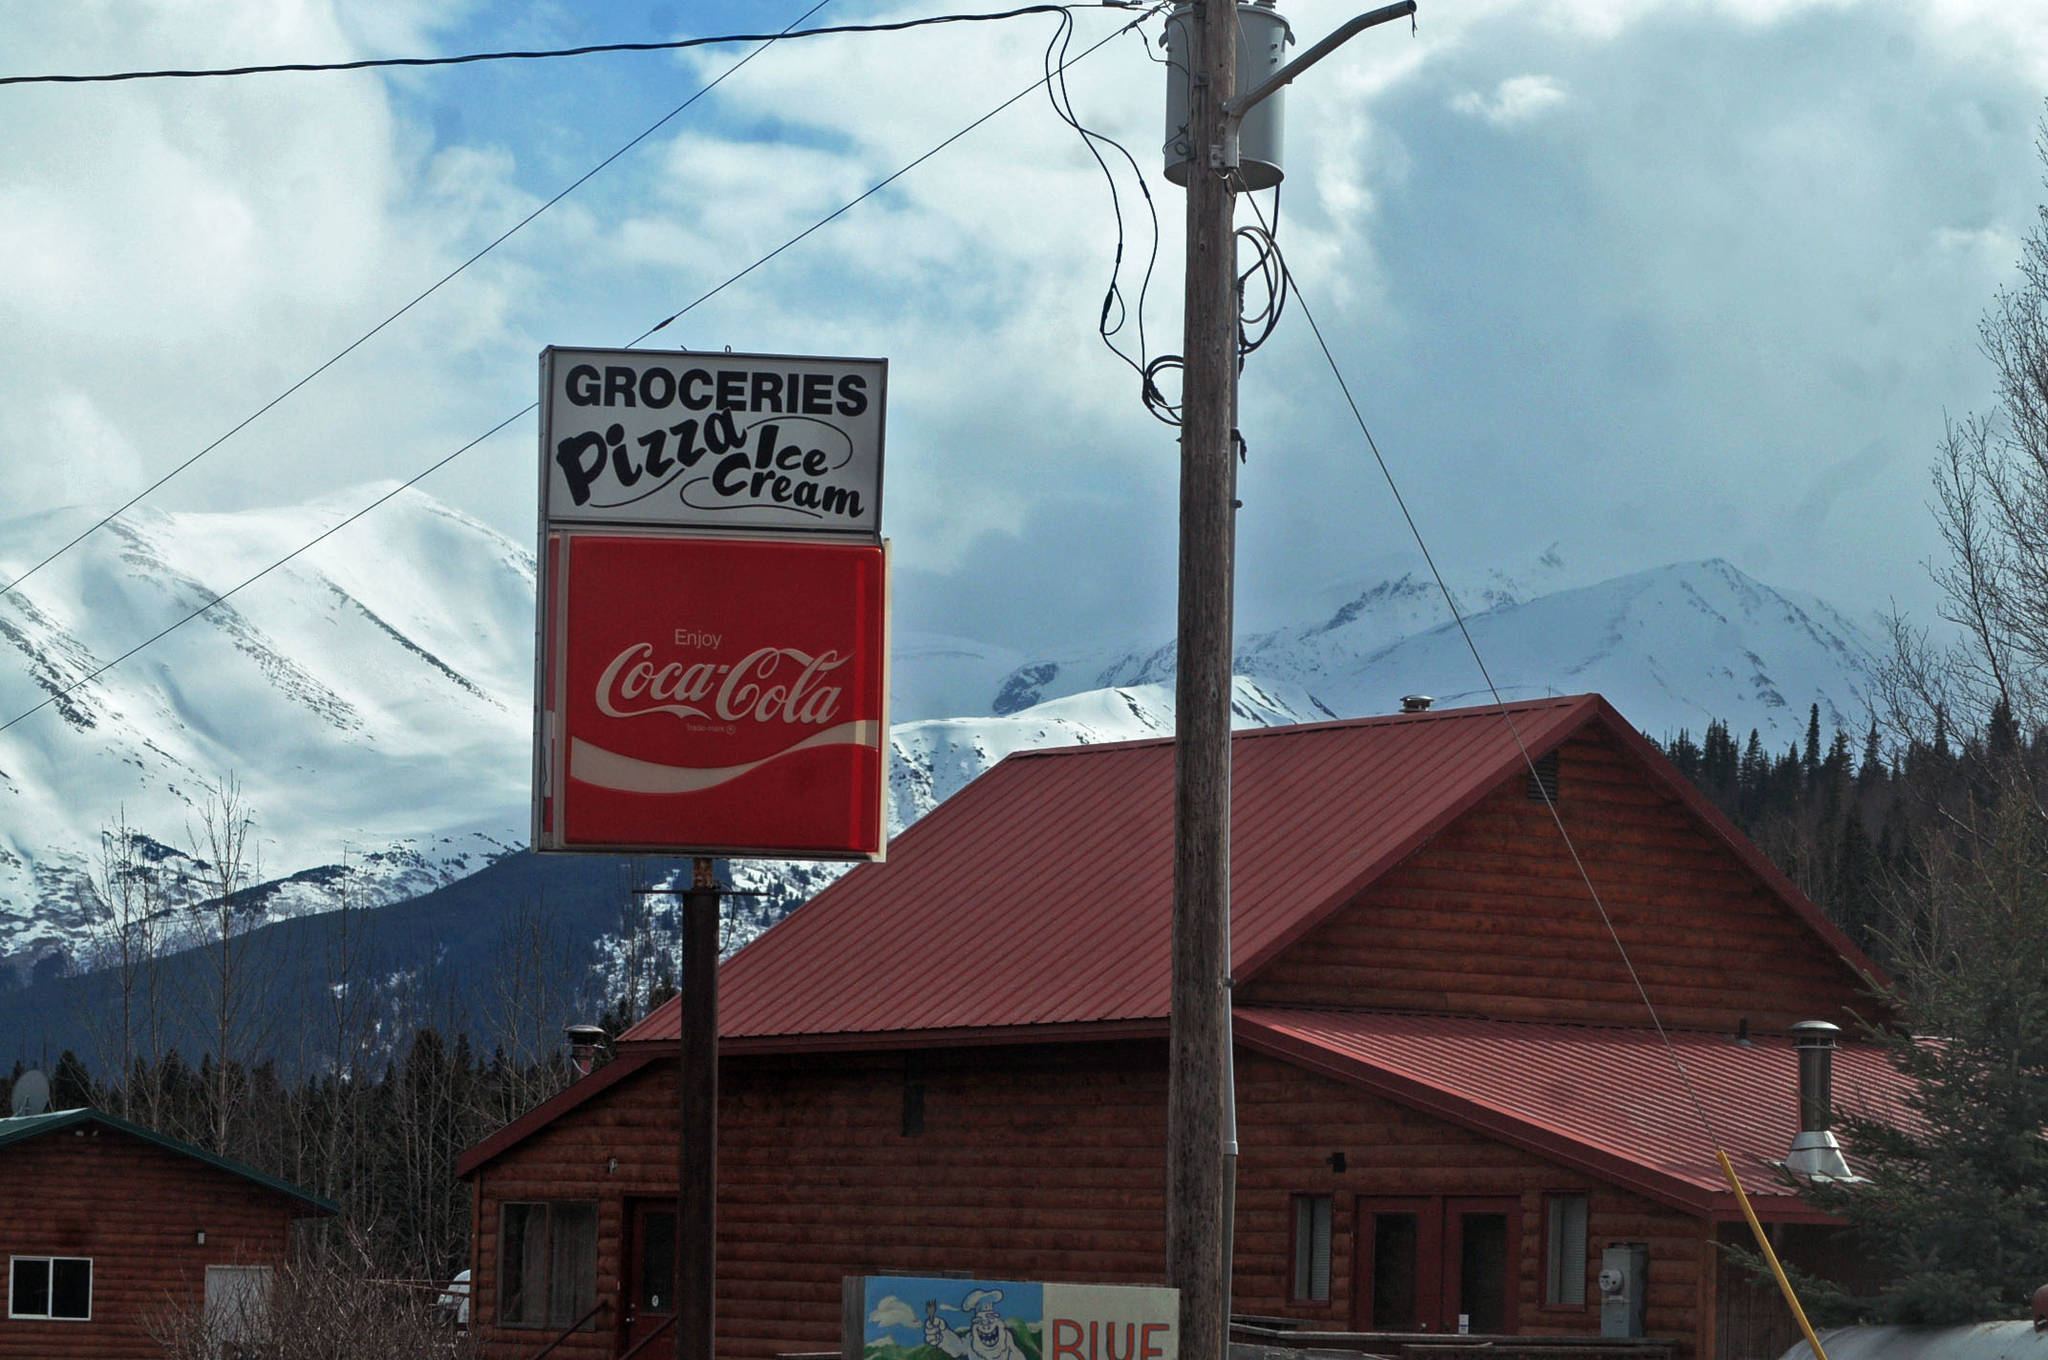 The mountains loom over a grocery store on the Sterling Highway on Wednesday, April 11, 2018 in Cooper Landing, Alaska. The Sterling Highway, the main corridor to and from the Kenai Peninsula, winds through the little community of Cooper Landing, often bringing dense traffic and car accidents with it, particularly in the summer. (Photo by Elizabeth Earl/Peninsula Clarion)